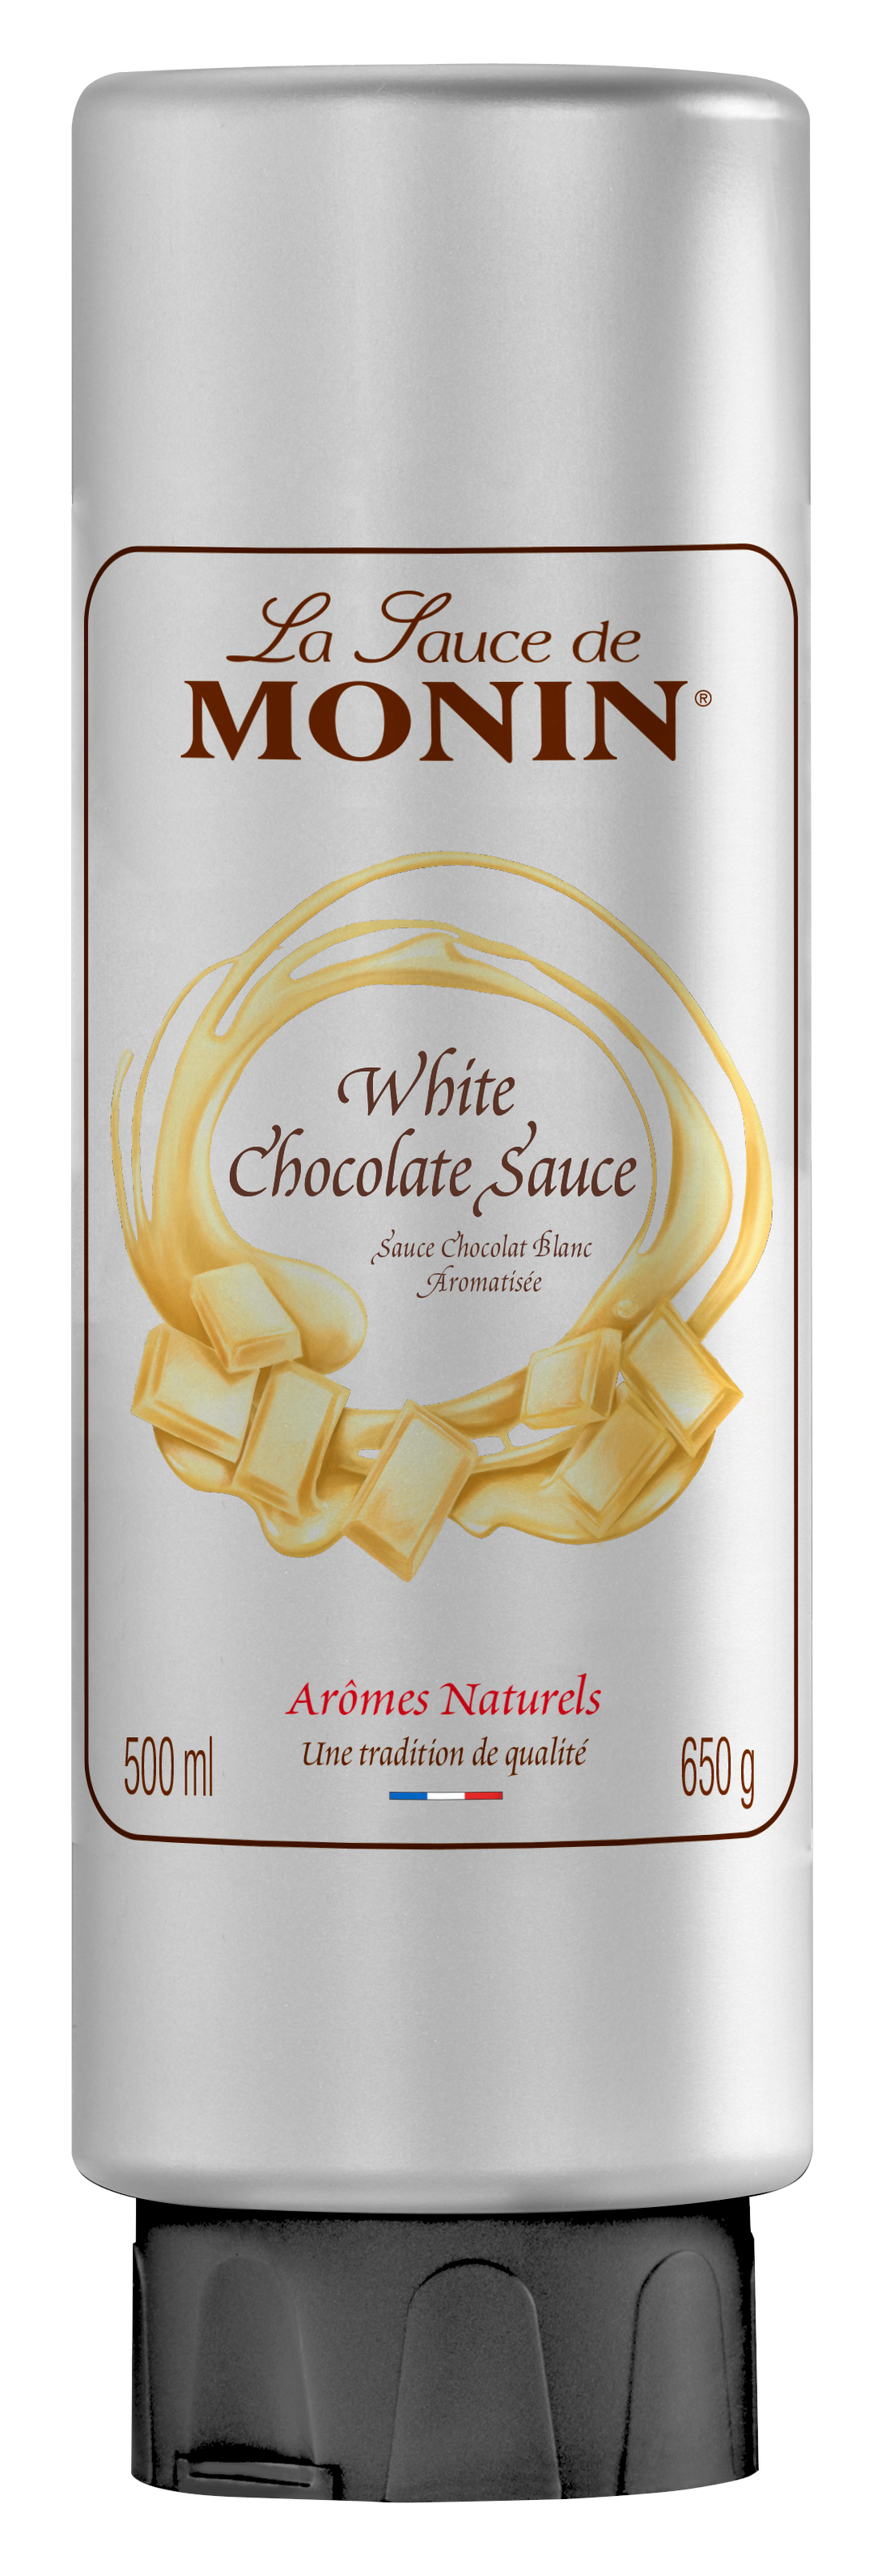 Buy MONIN White Chocolate sauce. It oozes creamy, buttery tastes and aromas.